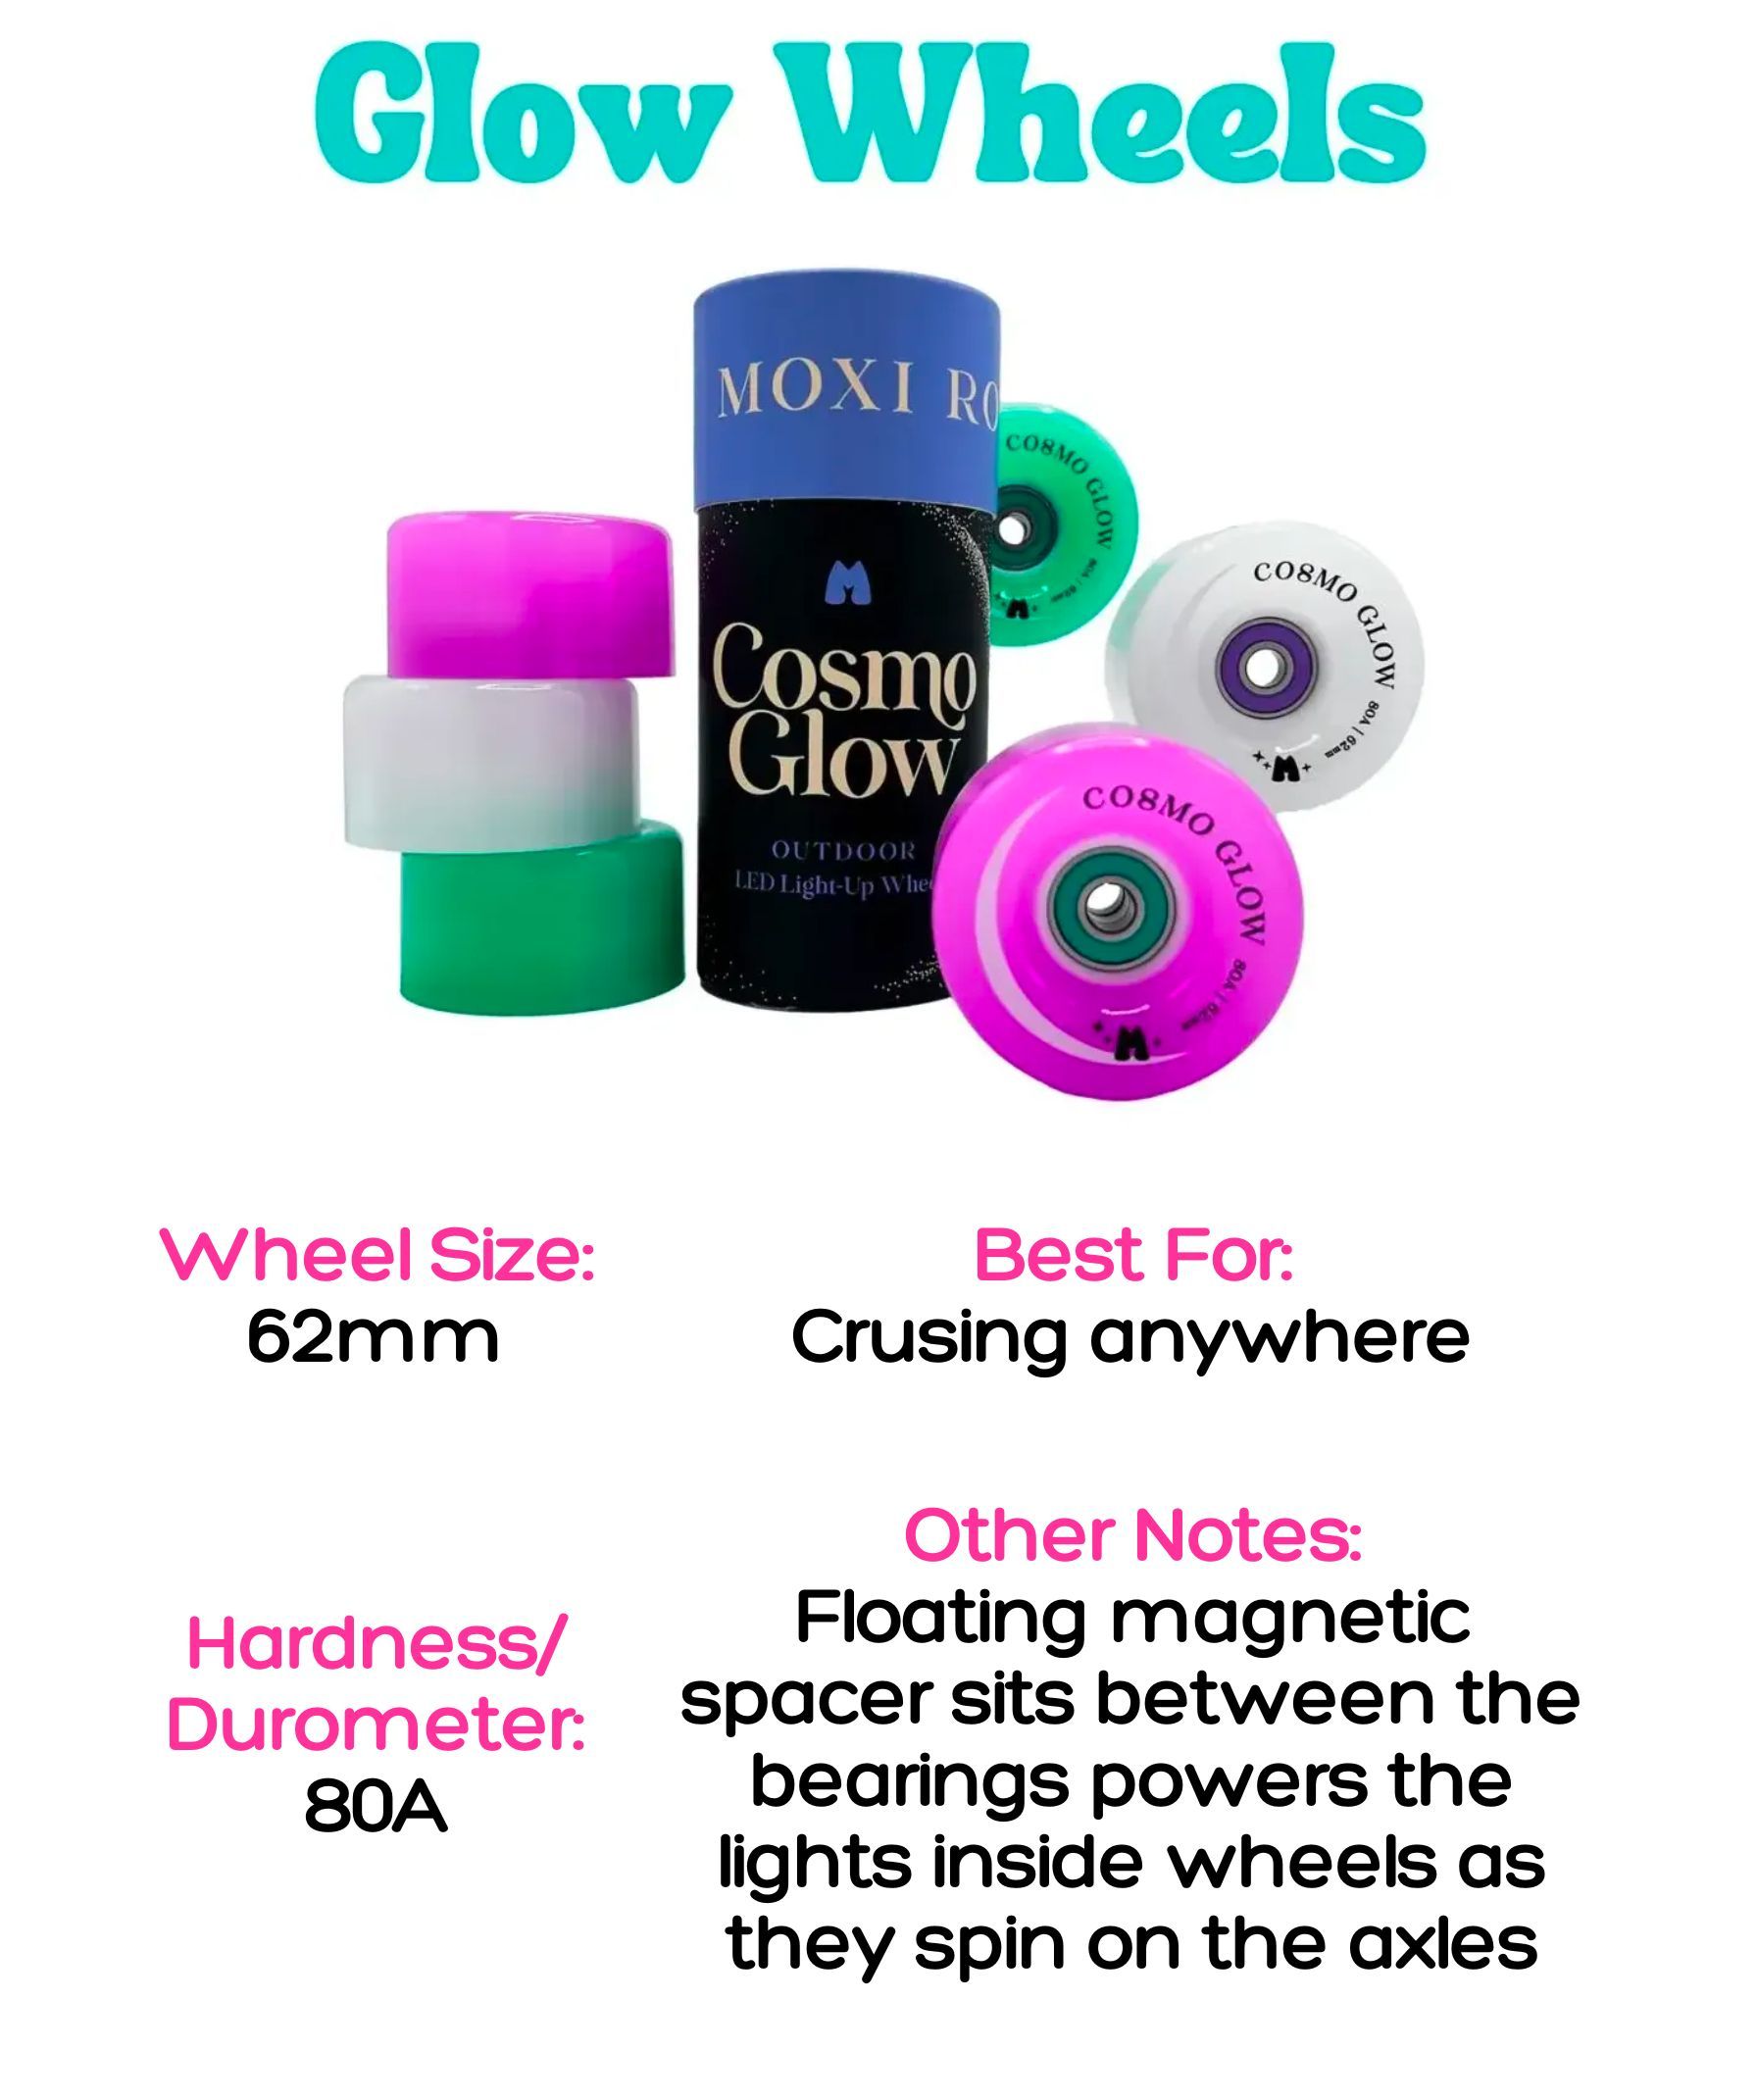 glow wheels, 62mm, 80A hardness, best for cruising anywhere, lights up